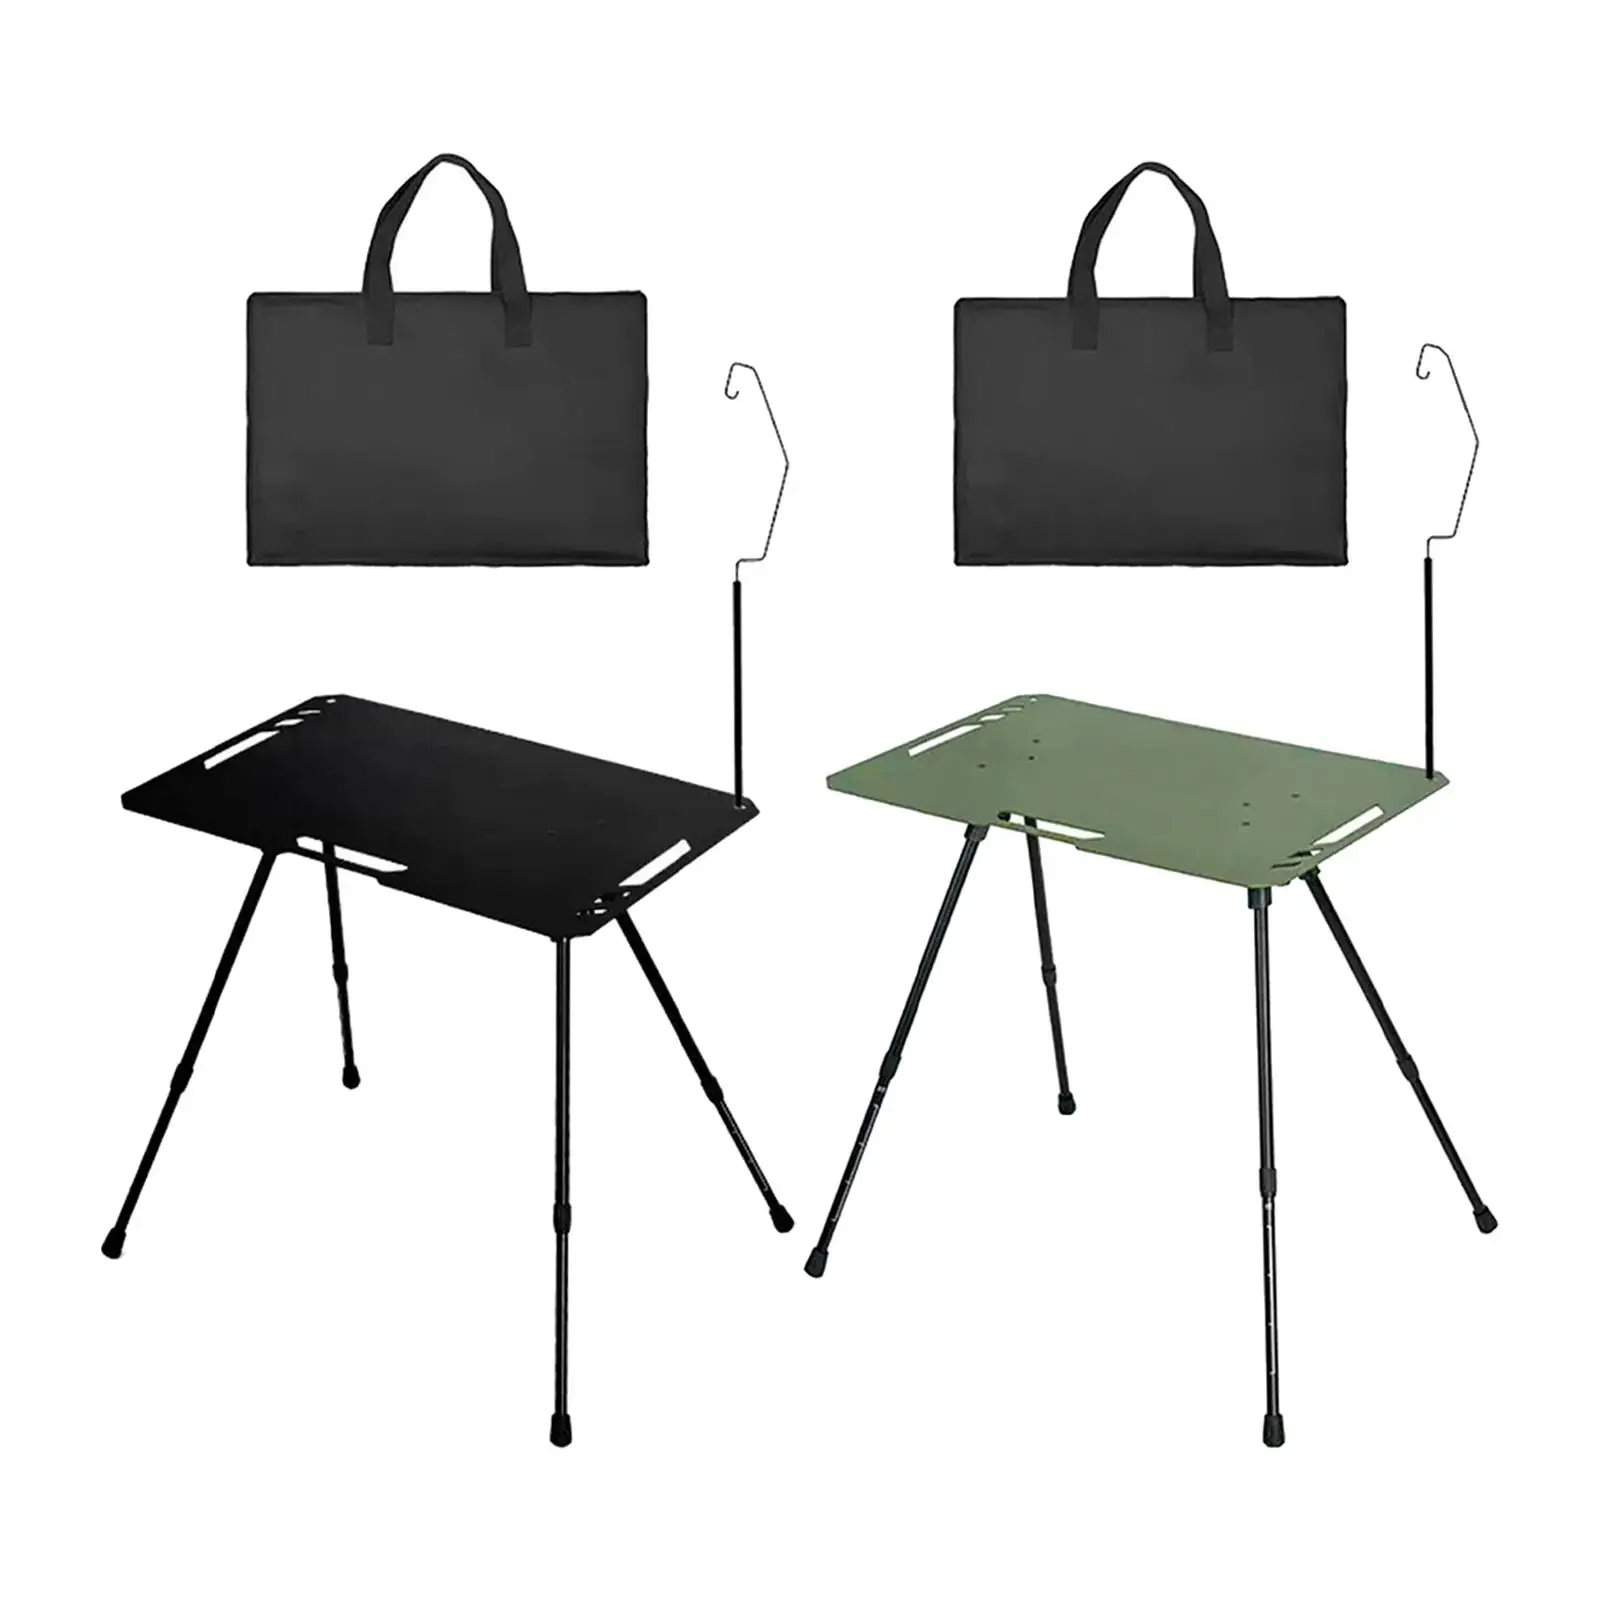 Camping Table Foldable with Lantern Holder Load 30kg Folding Table Outside Tea Table for Barbecue Patio Camping in Garden Travel